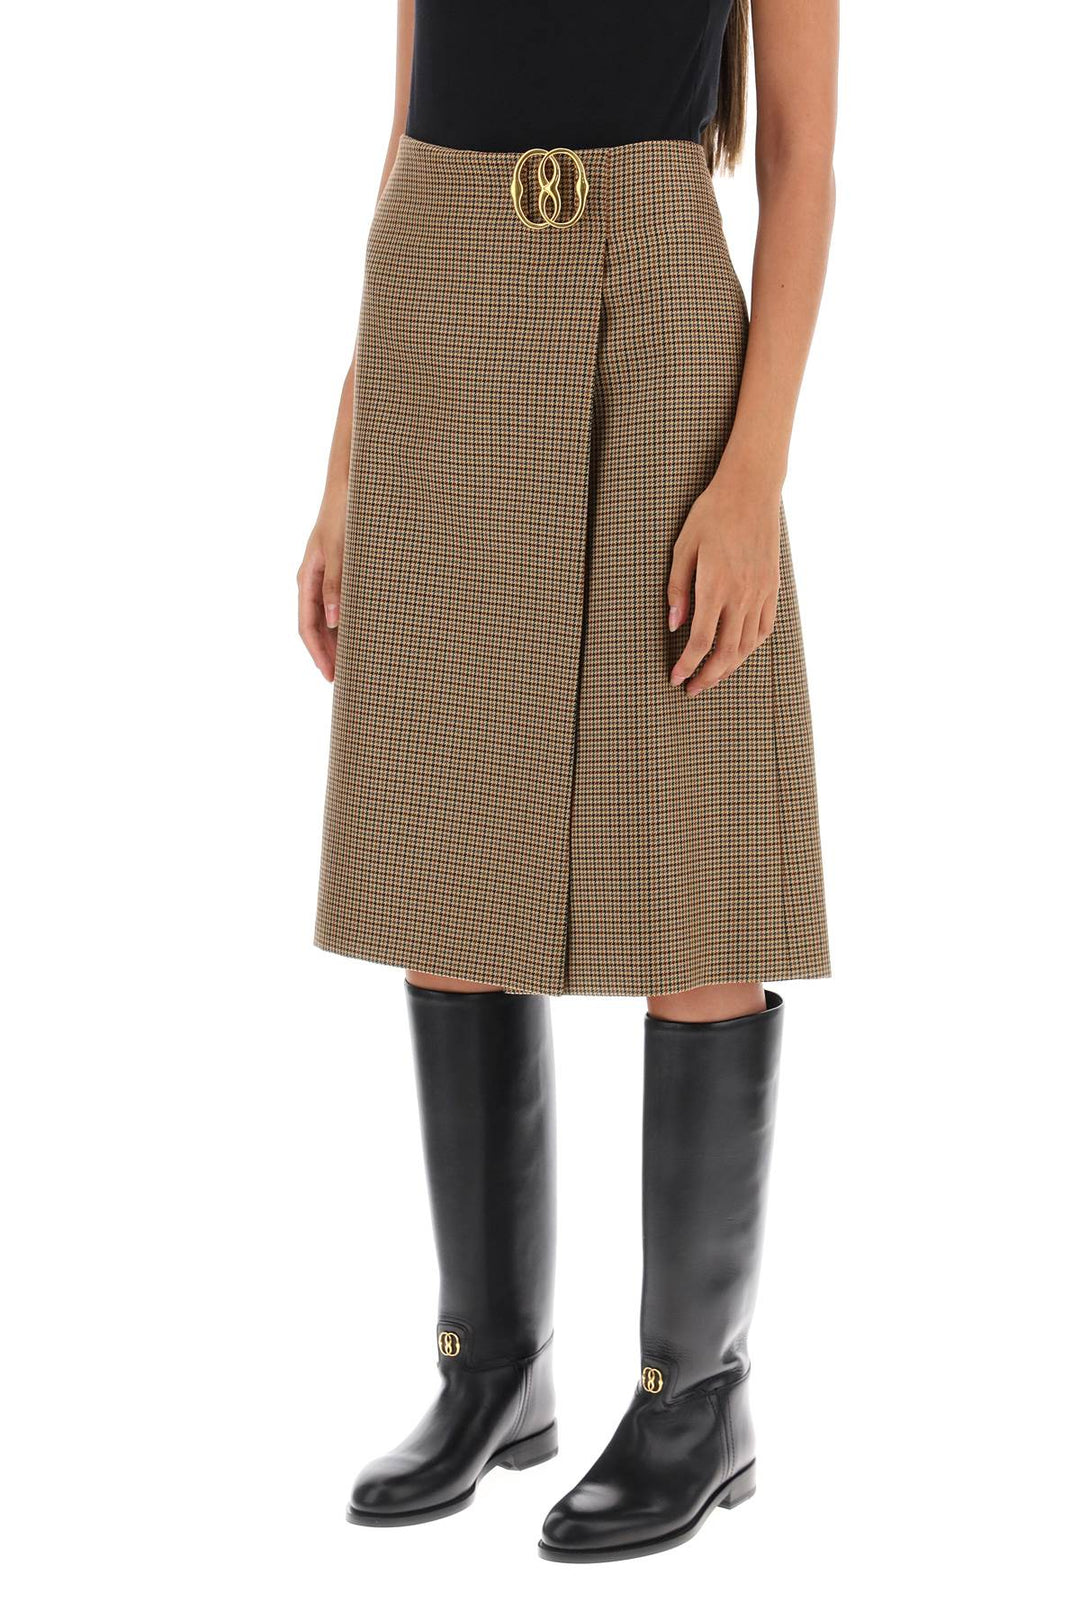 Bally Houndstooth A Line Skirt With Emblem Buckle   Beige